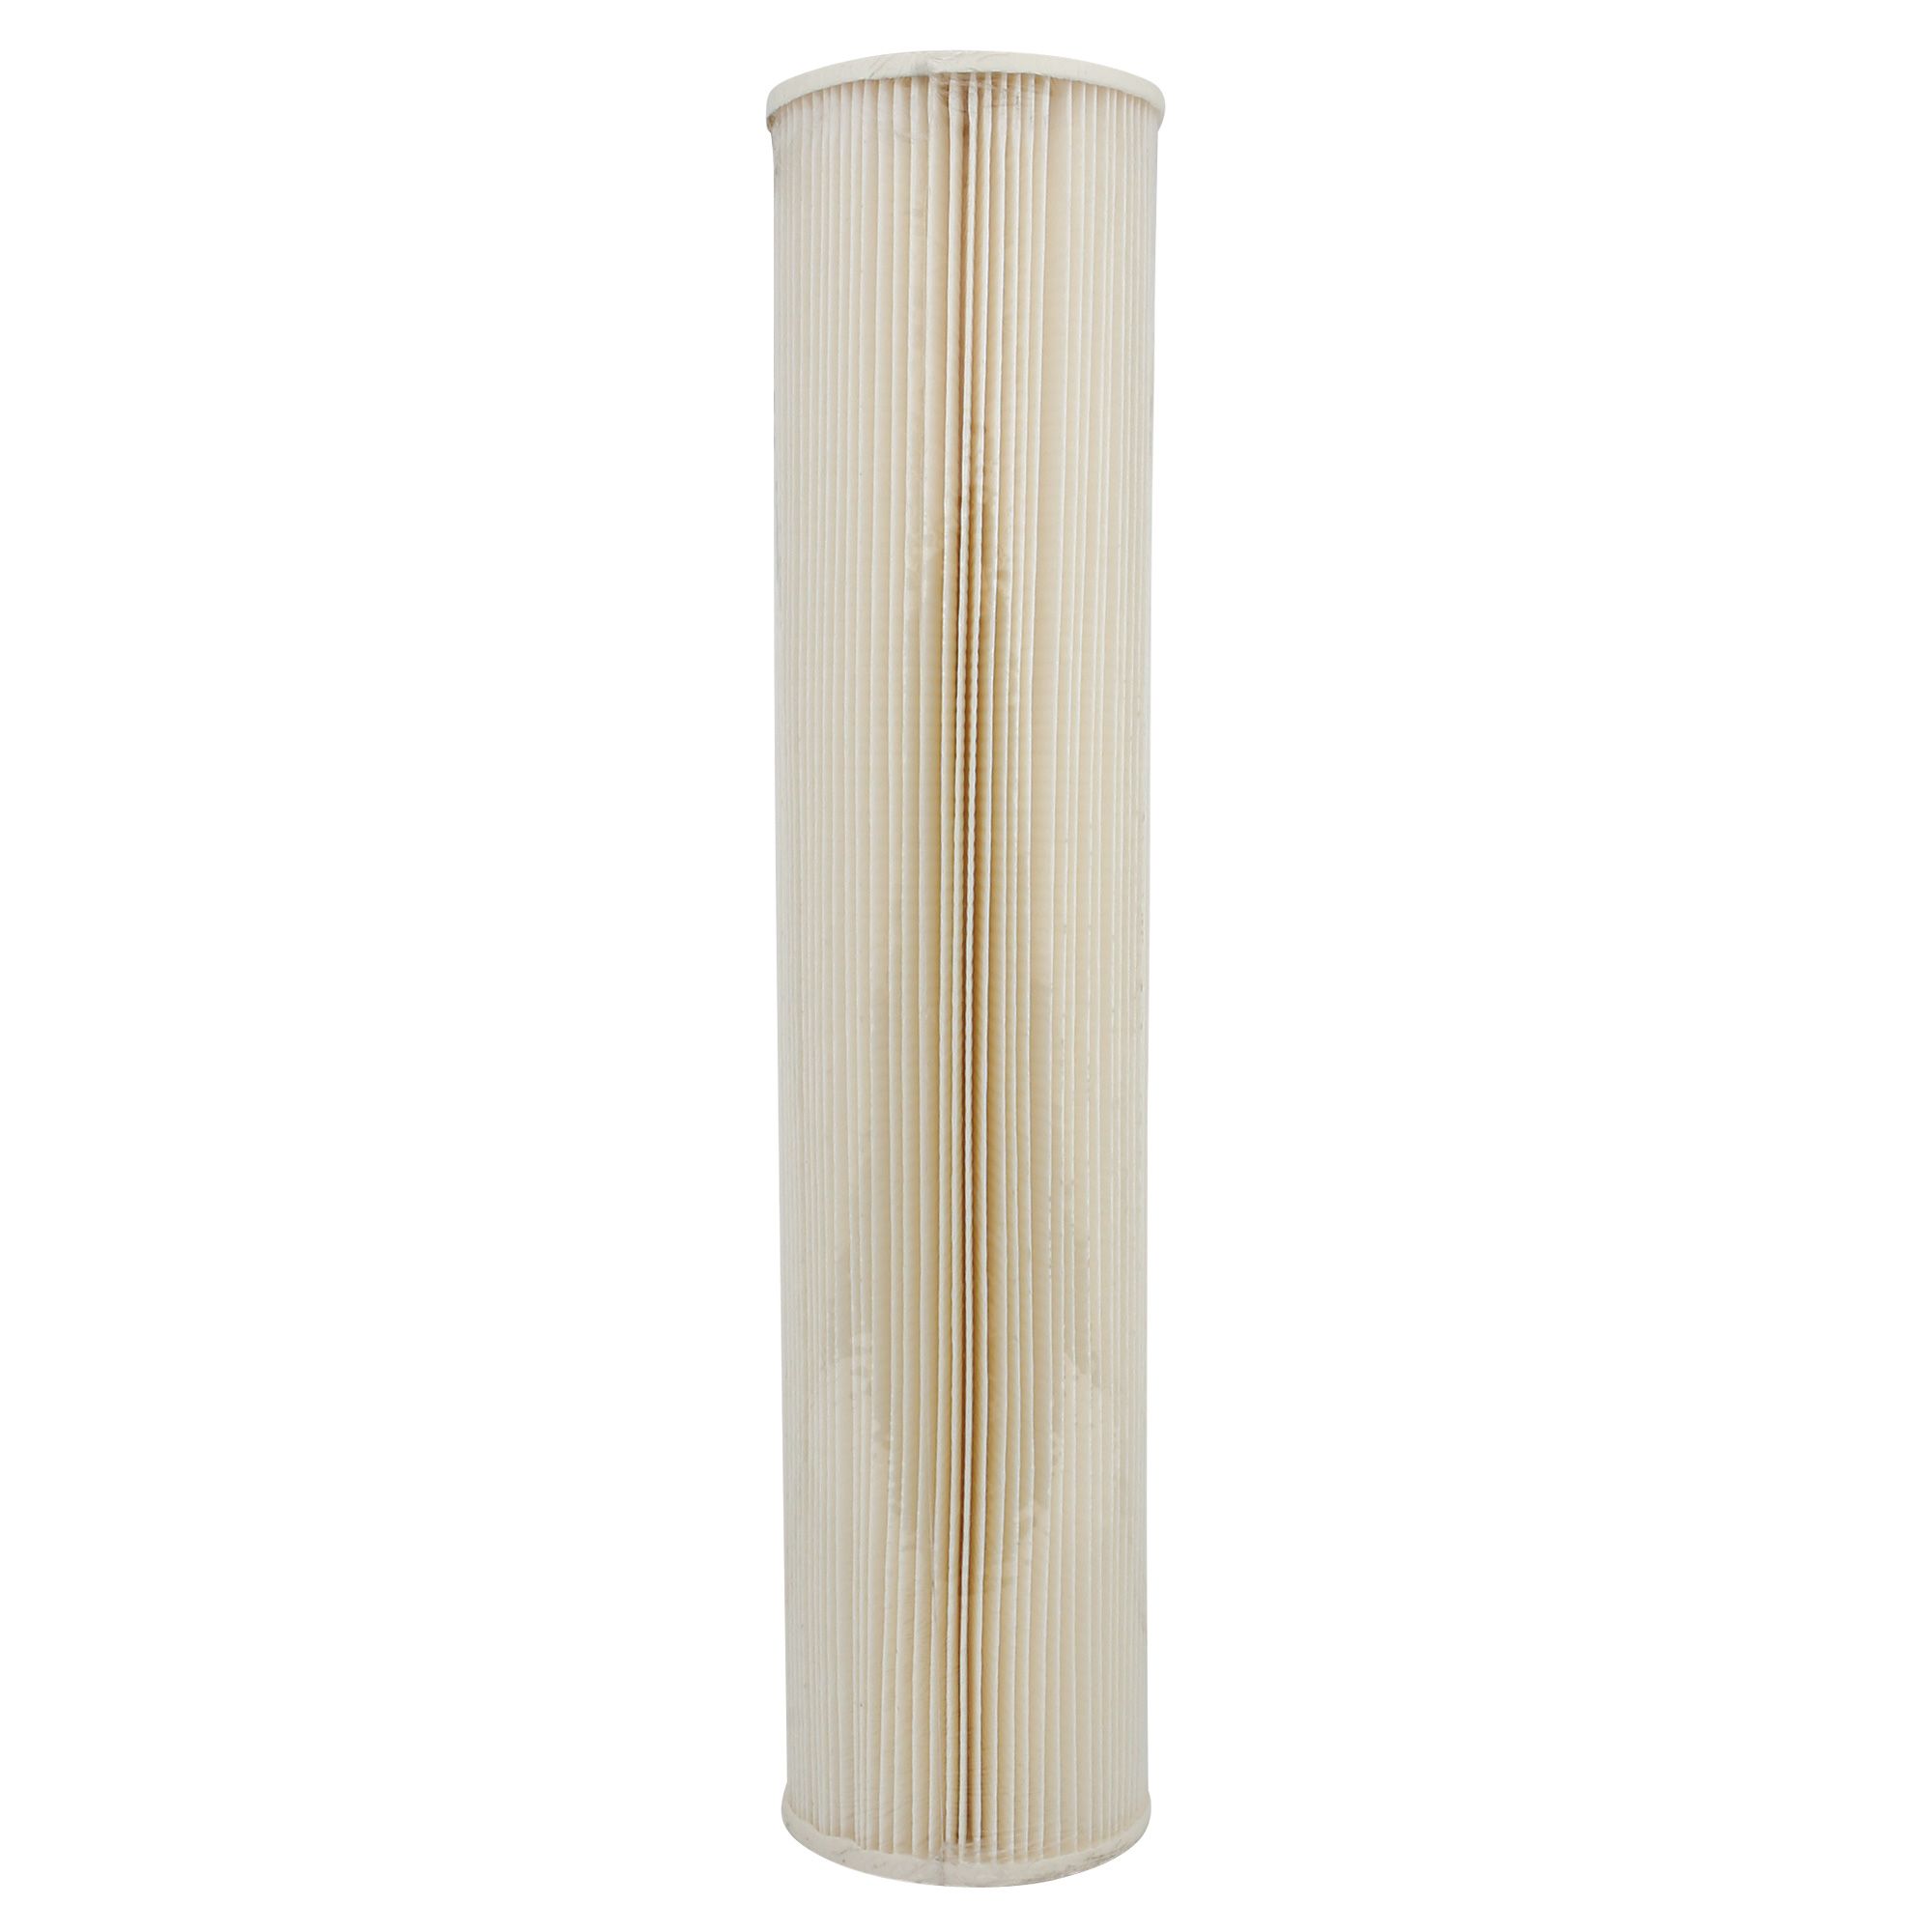 12.75 OD 36 Length TDC 10004162 OEM Replacement Cartridge Filter Cellulose/Polyester Blend Filter Media 